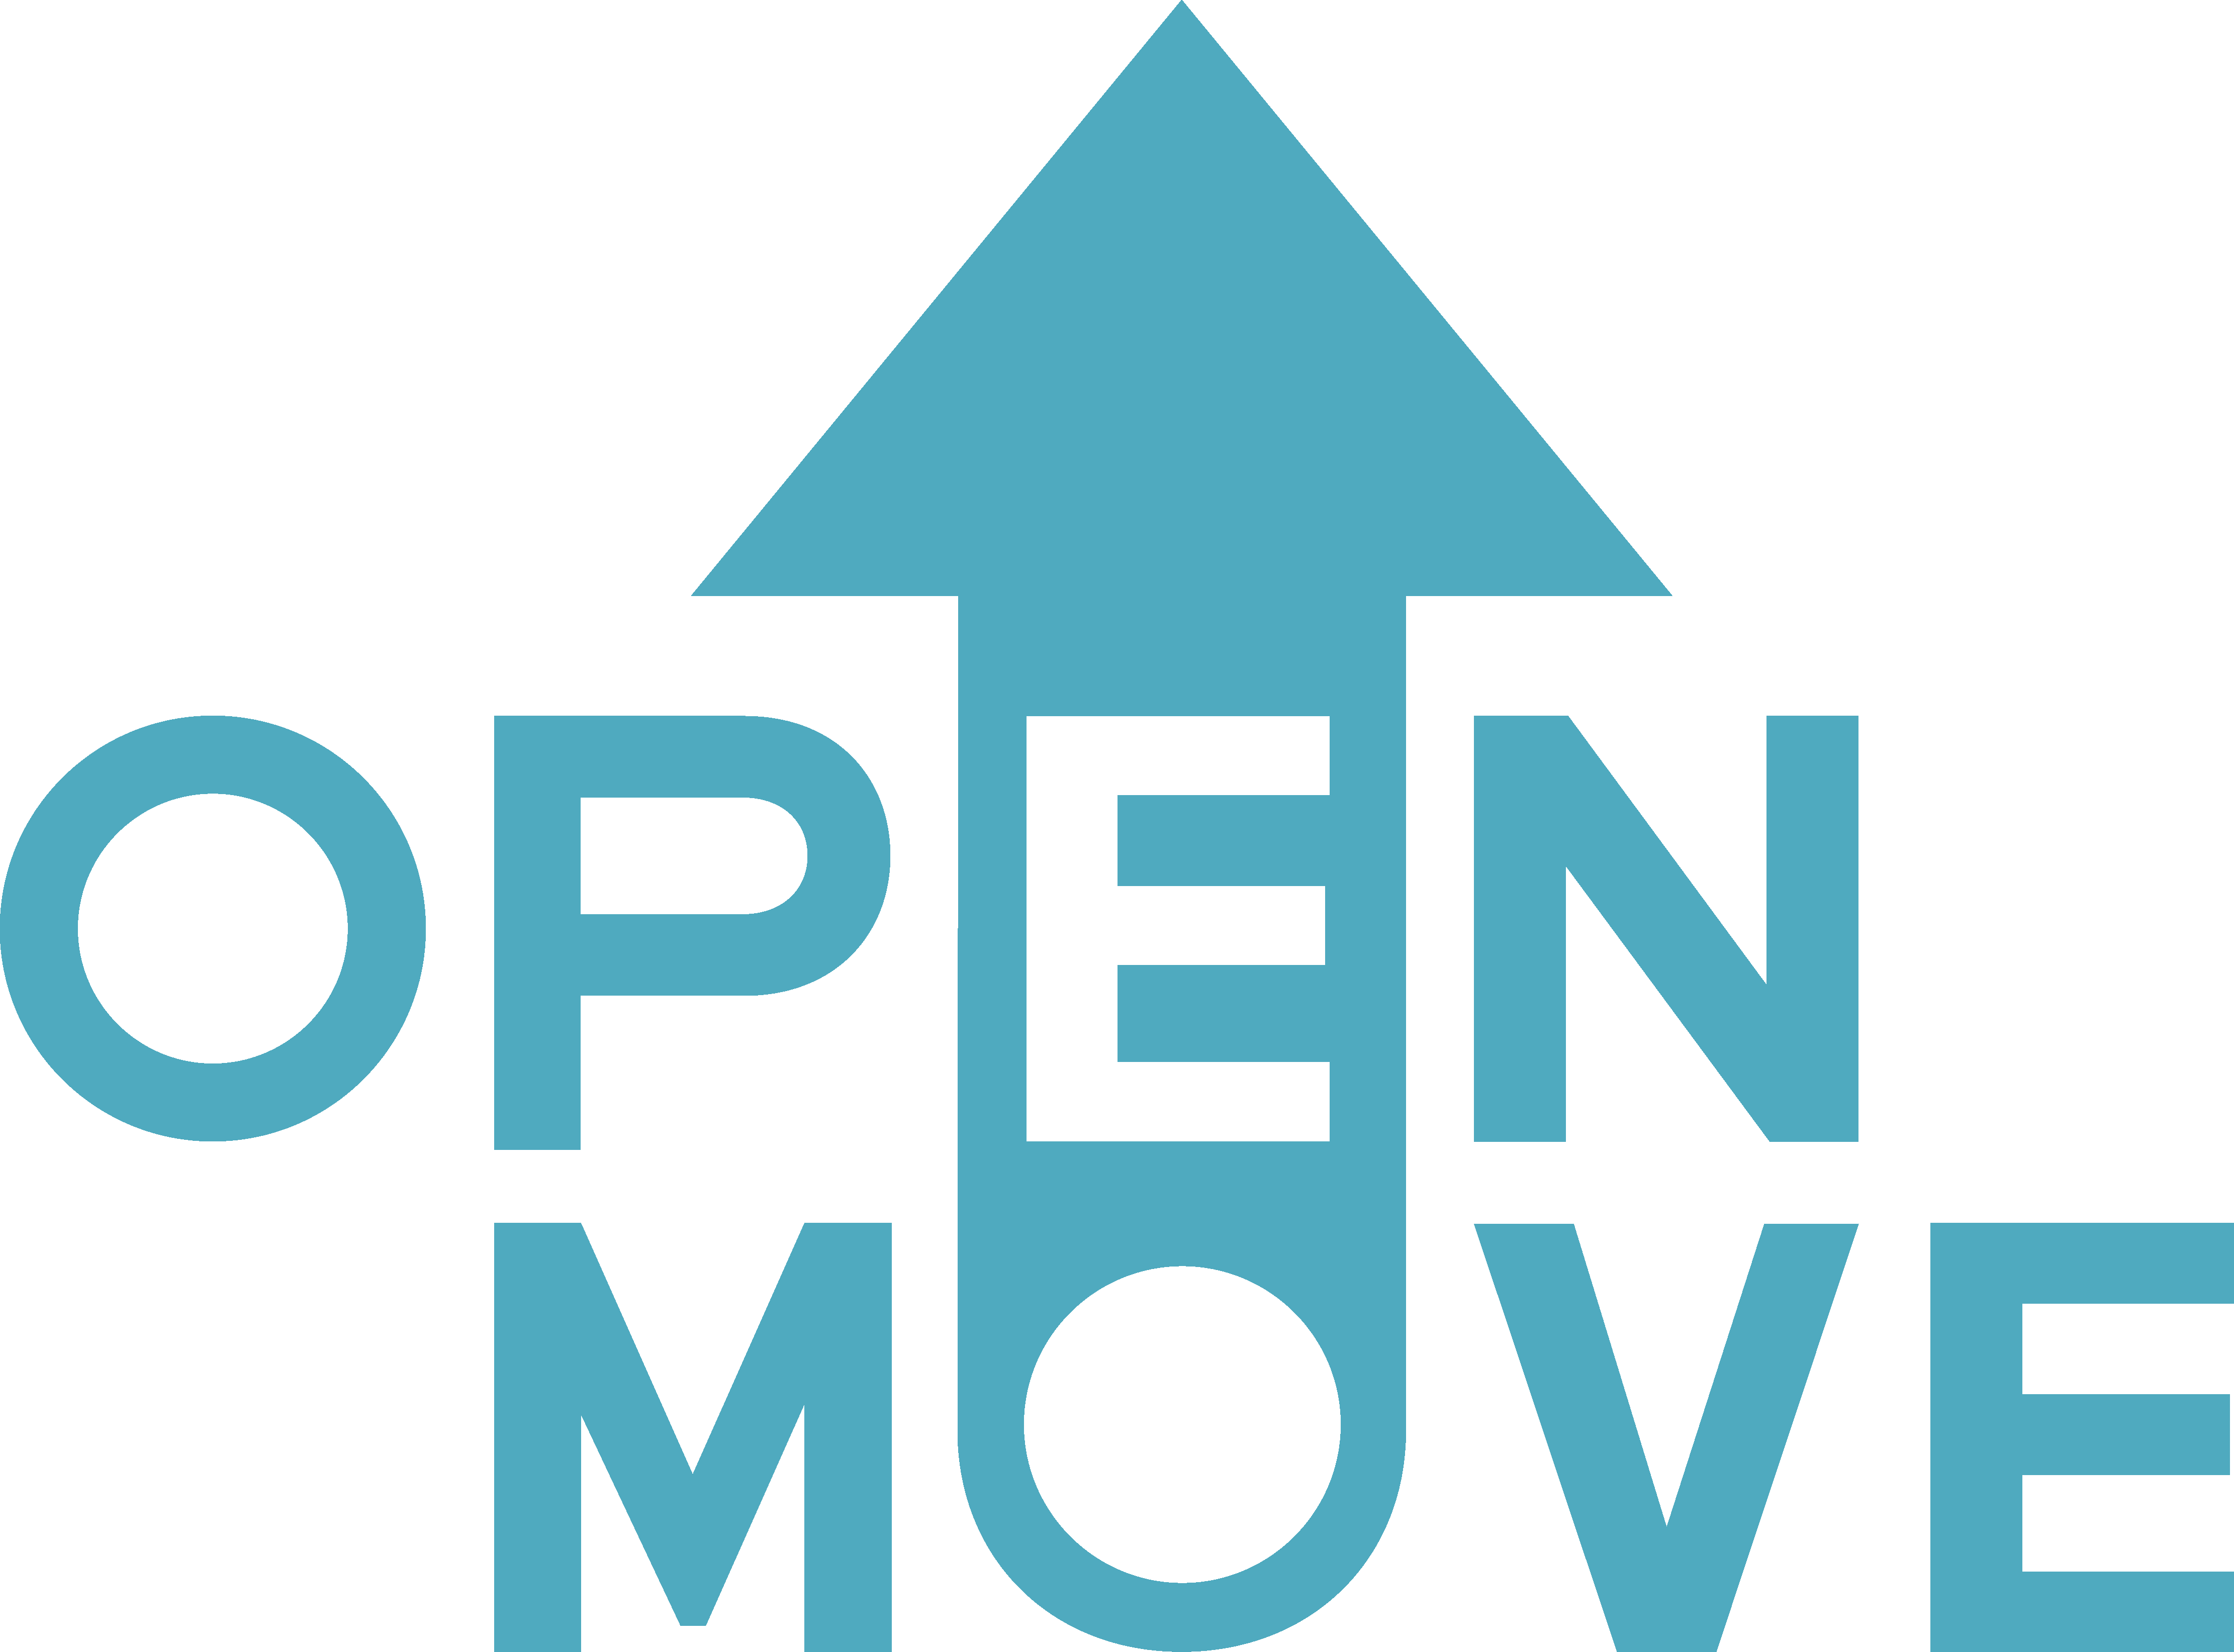 Supported by Openmove